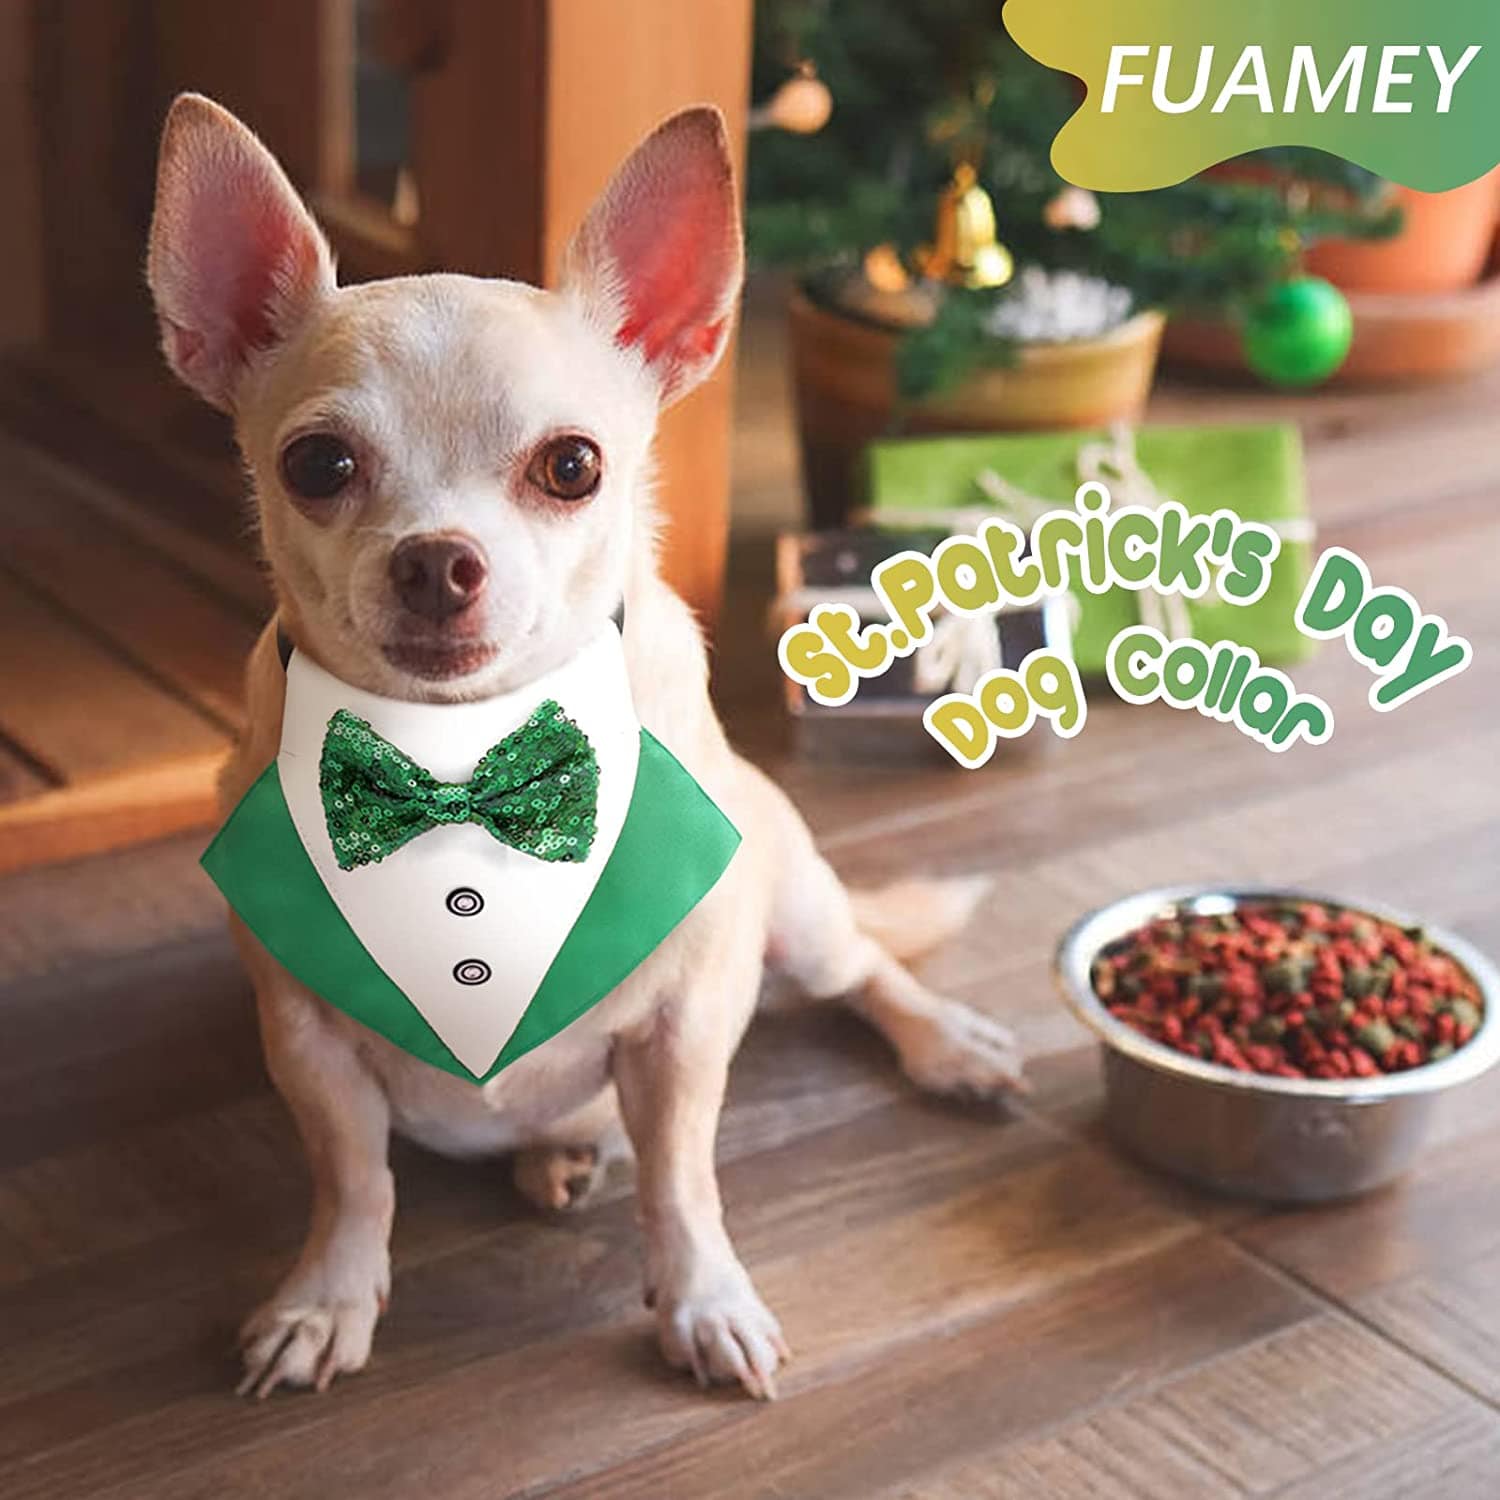 Cucumber Vegetables Green Food Dog Bandanas Summer Daily Triangle Bibs  Puppies Kerchief Set Scarfs Accessories for Small Large Dogs Cats Pets  Birthday